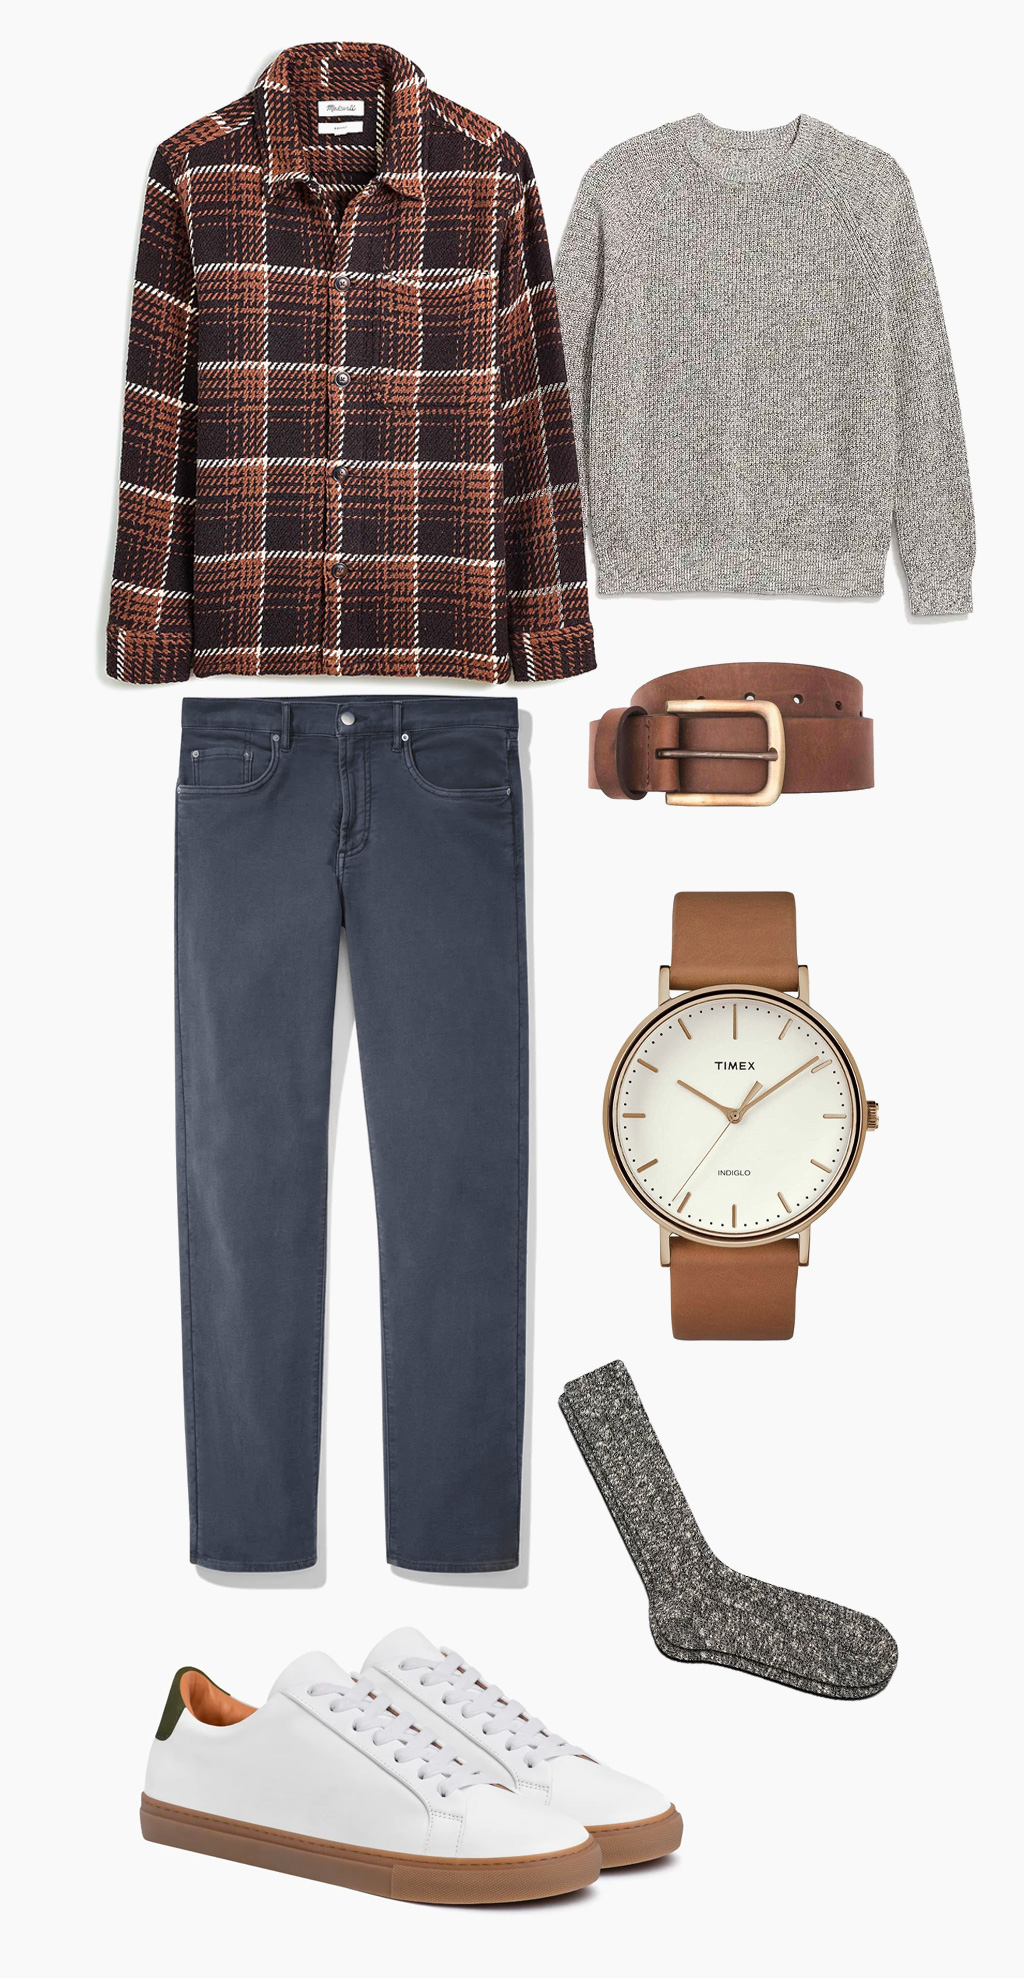 a collage of a men's casual fall outfit featuring a brown shirt jacket, gray sweater, brown belt and watch, blue pants, marled gray socks and white gum sole sneakers from Thursday